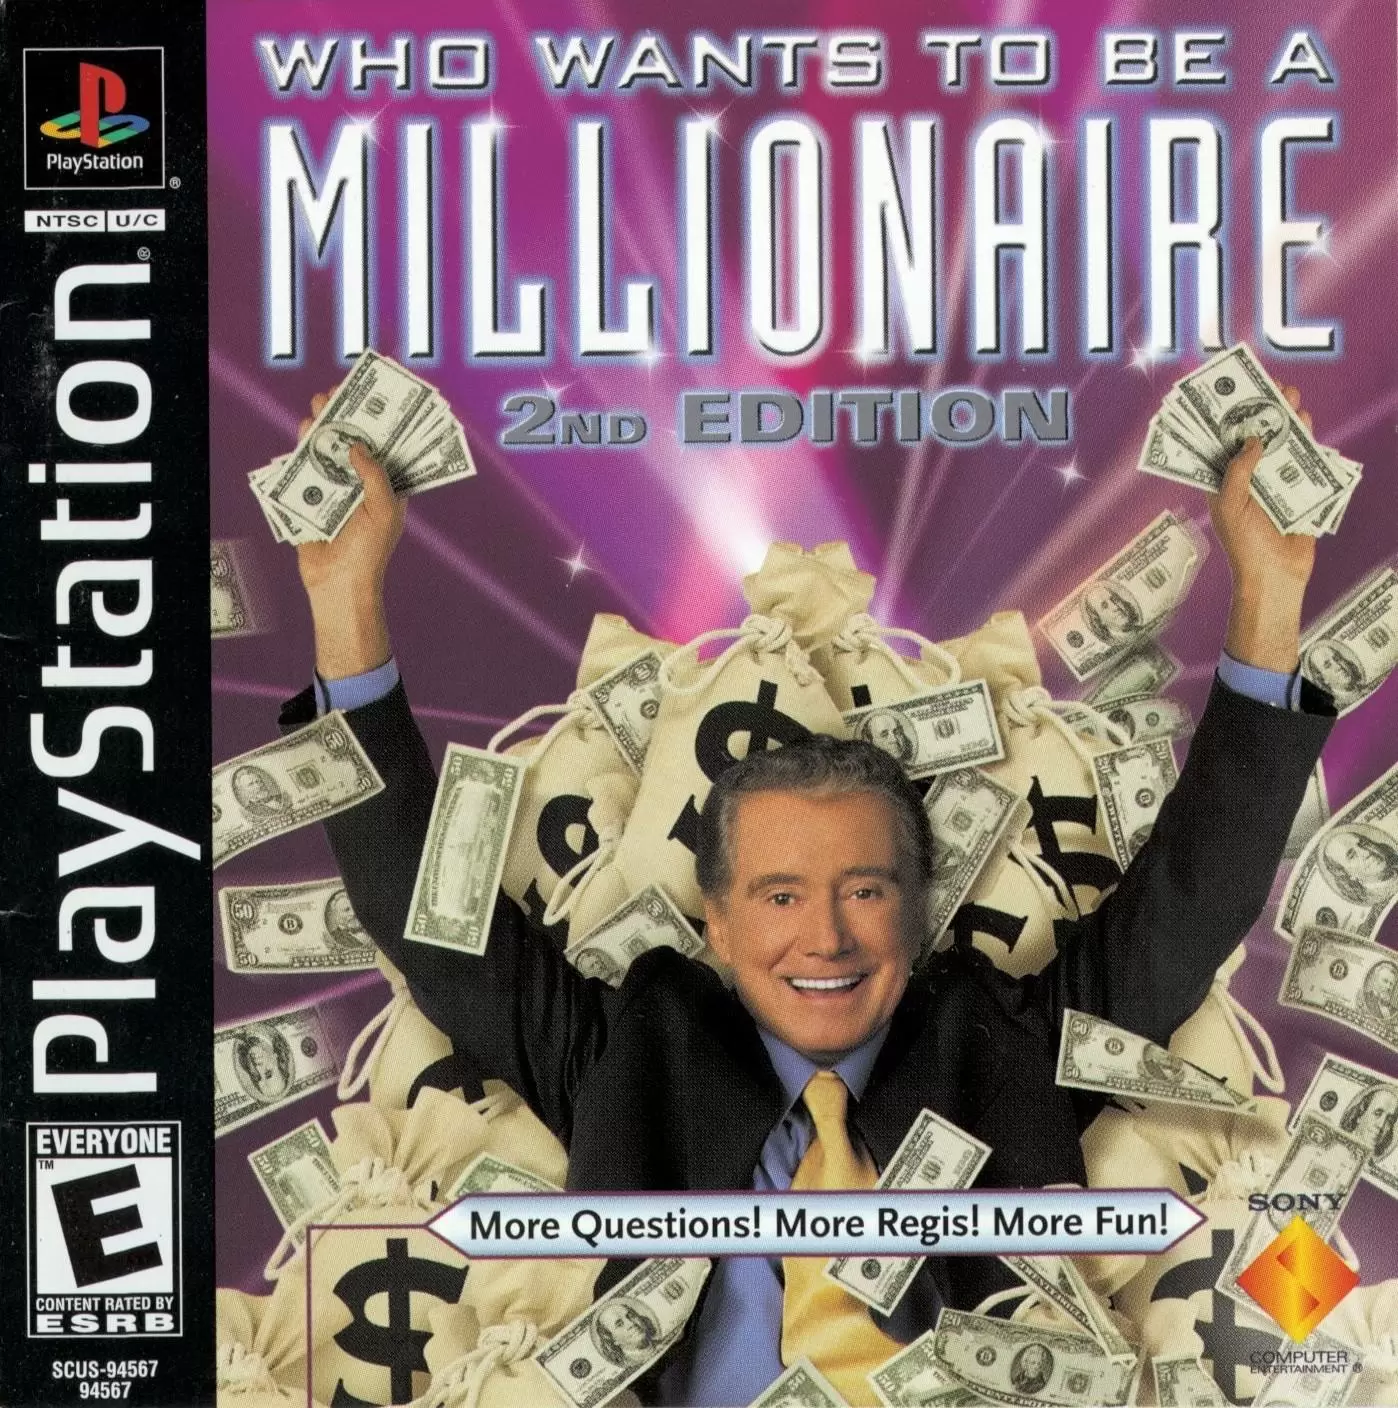 Playstation games - Who Wants To Be A Millionaire: 2nd Edition